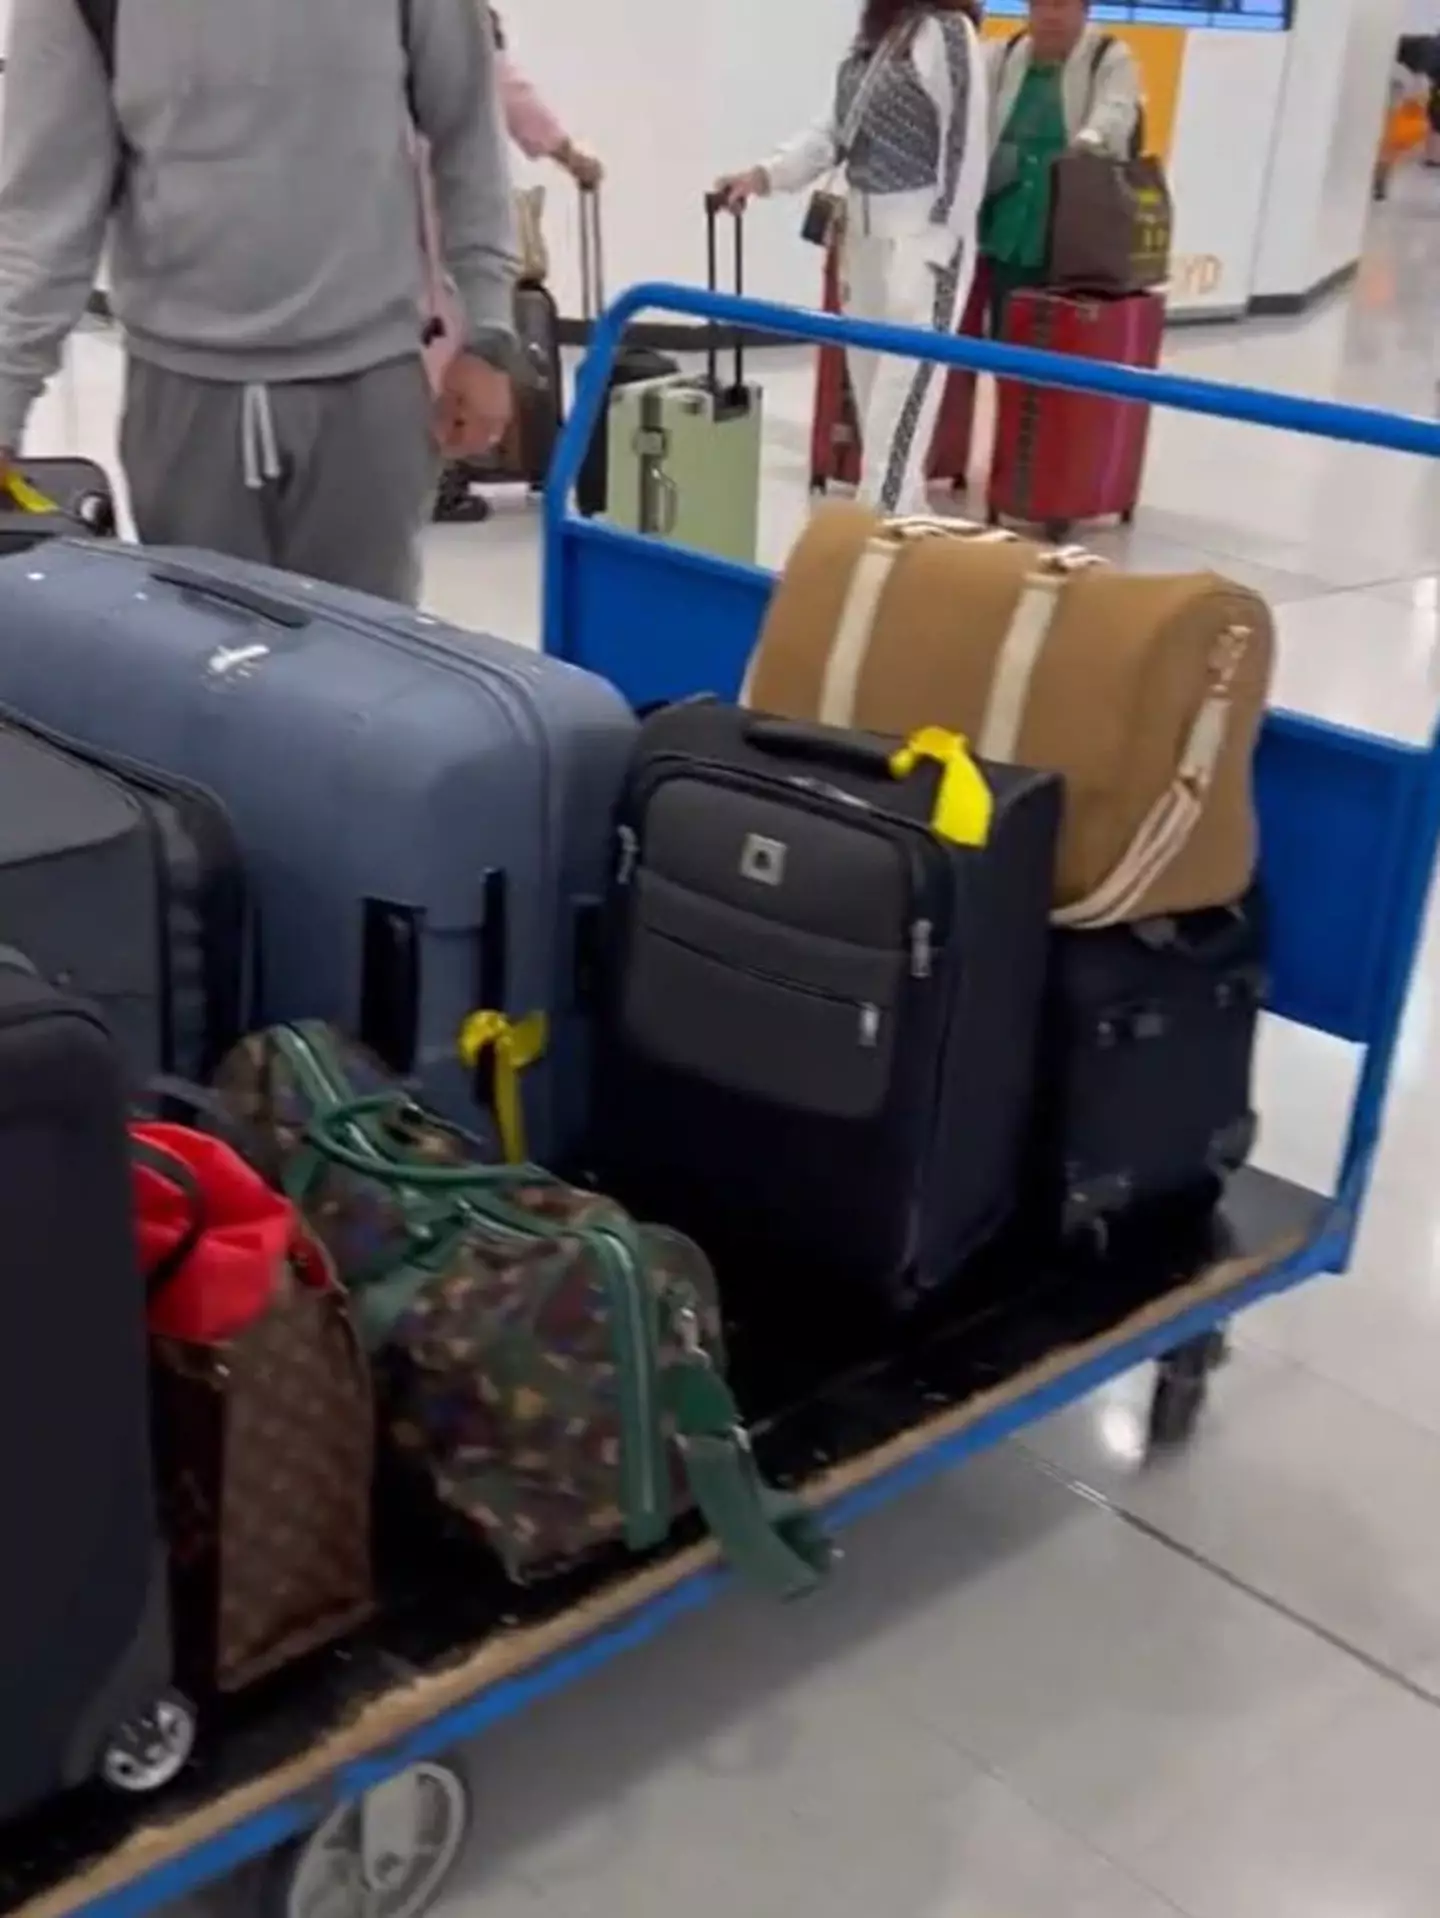 Some TikTok users were very bothered about the 18 pieces of luggage.